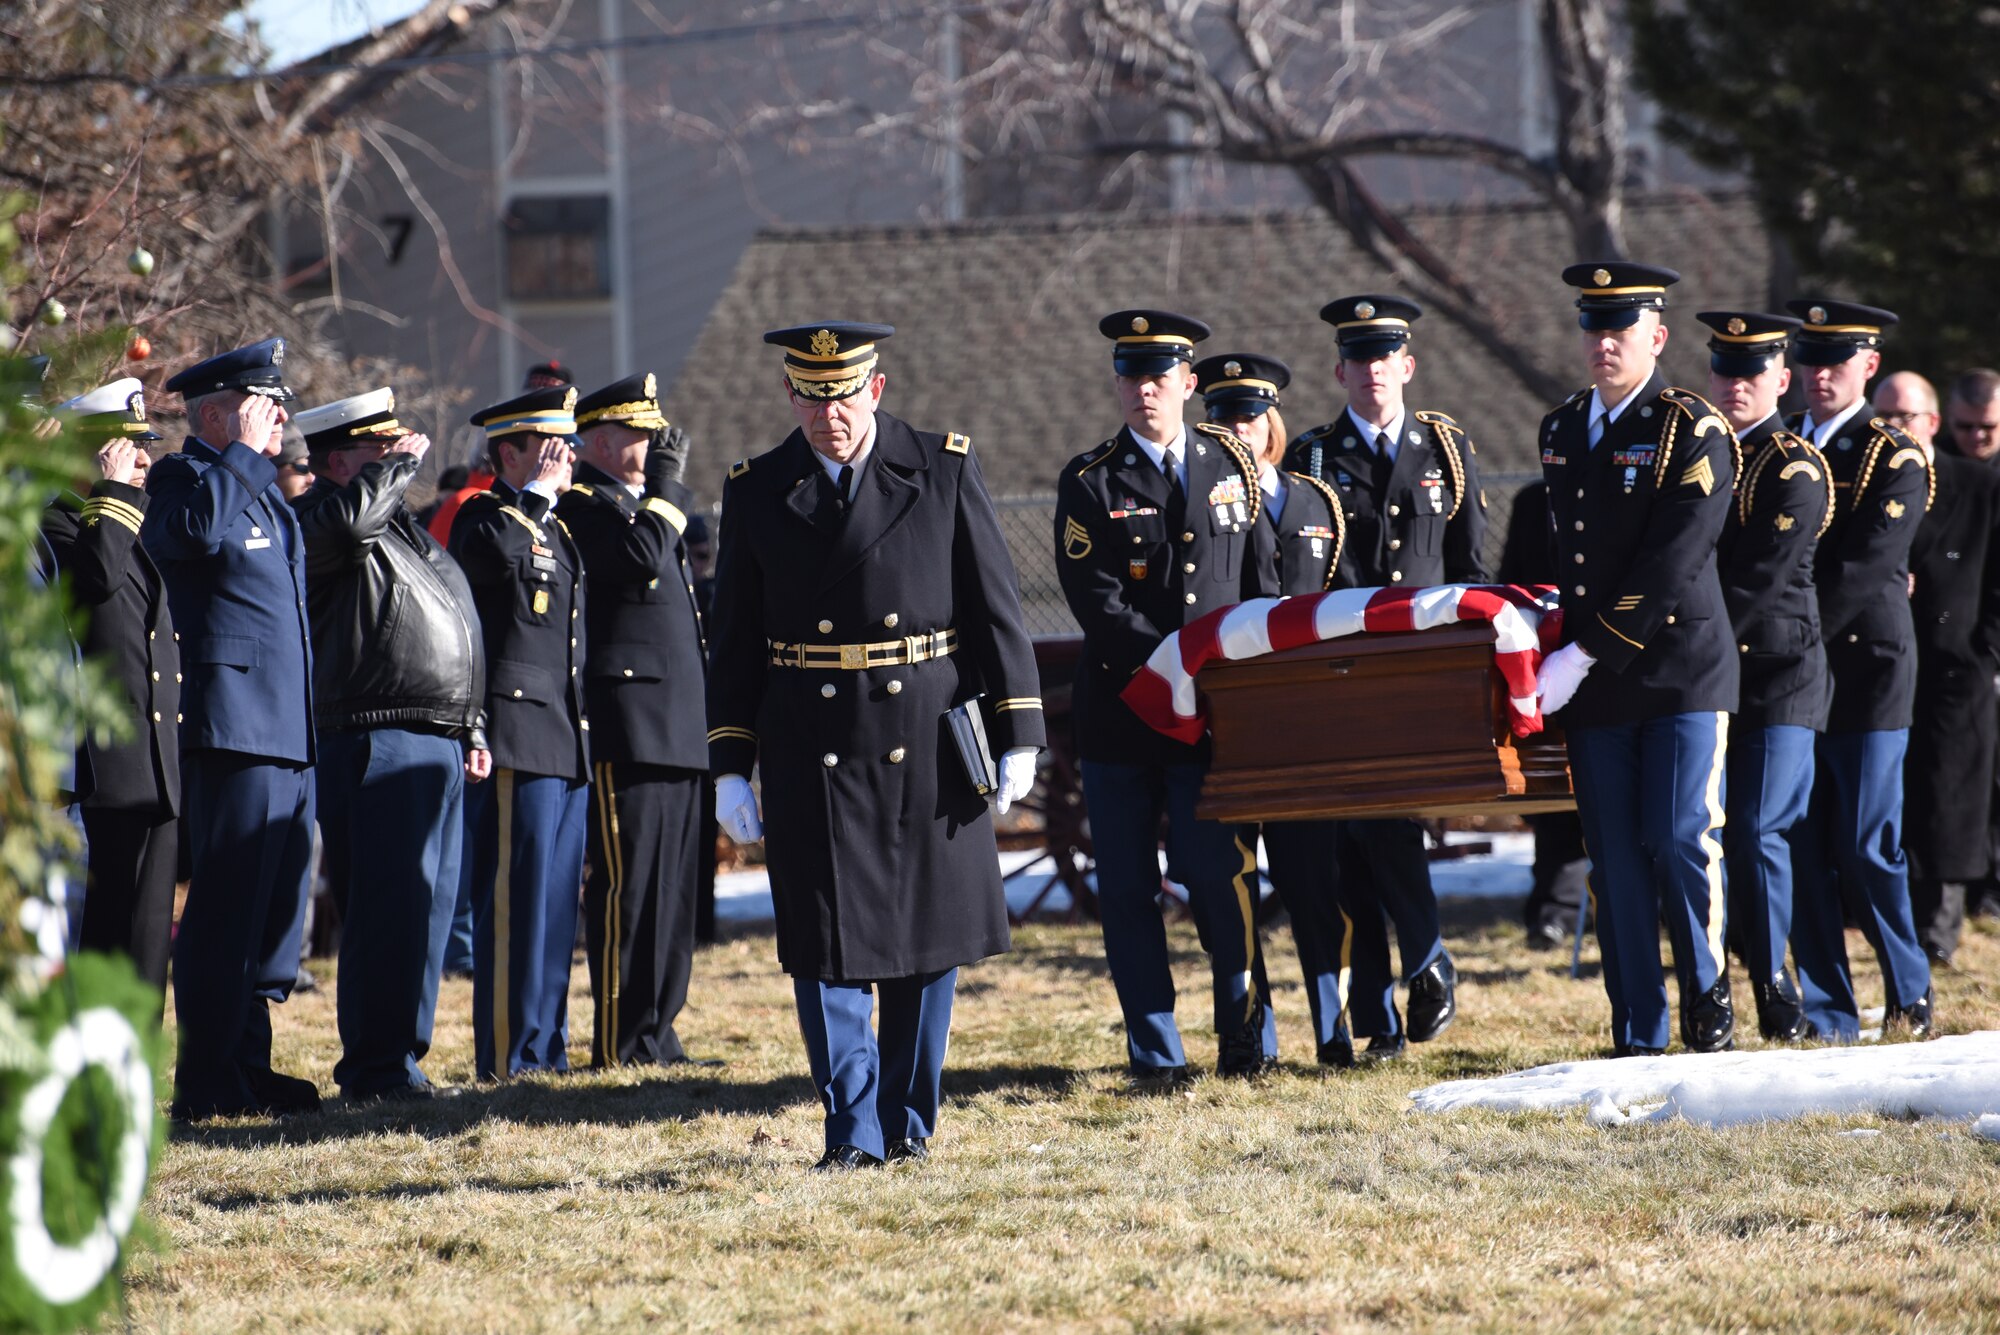 Medal of Honor recipient U.S. Army Pvt. George “Joe” Sakato is interred at Fairmount Cemetery in Denver, Jan. 16, 2016. Sakato, Colorado resident and Medal of Honor recipient from World War II, was laid to rest with full military honors. Sakato distinguished himself by extraordinary heroism in action Oct. 29, 1944, on Hill 617 in the vicinity of Biffontaine, France. (U.S. Army National Guard photo by Staff Sgt. Manda Walters/Released)